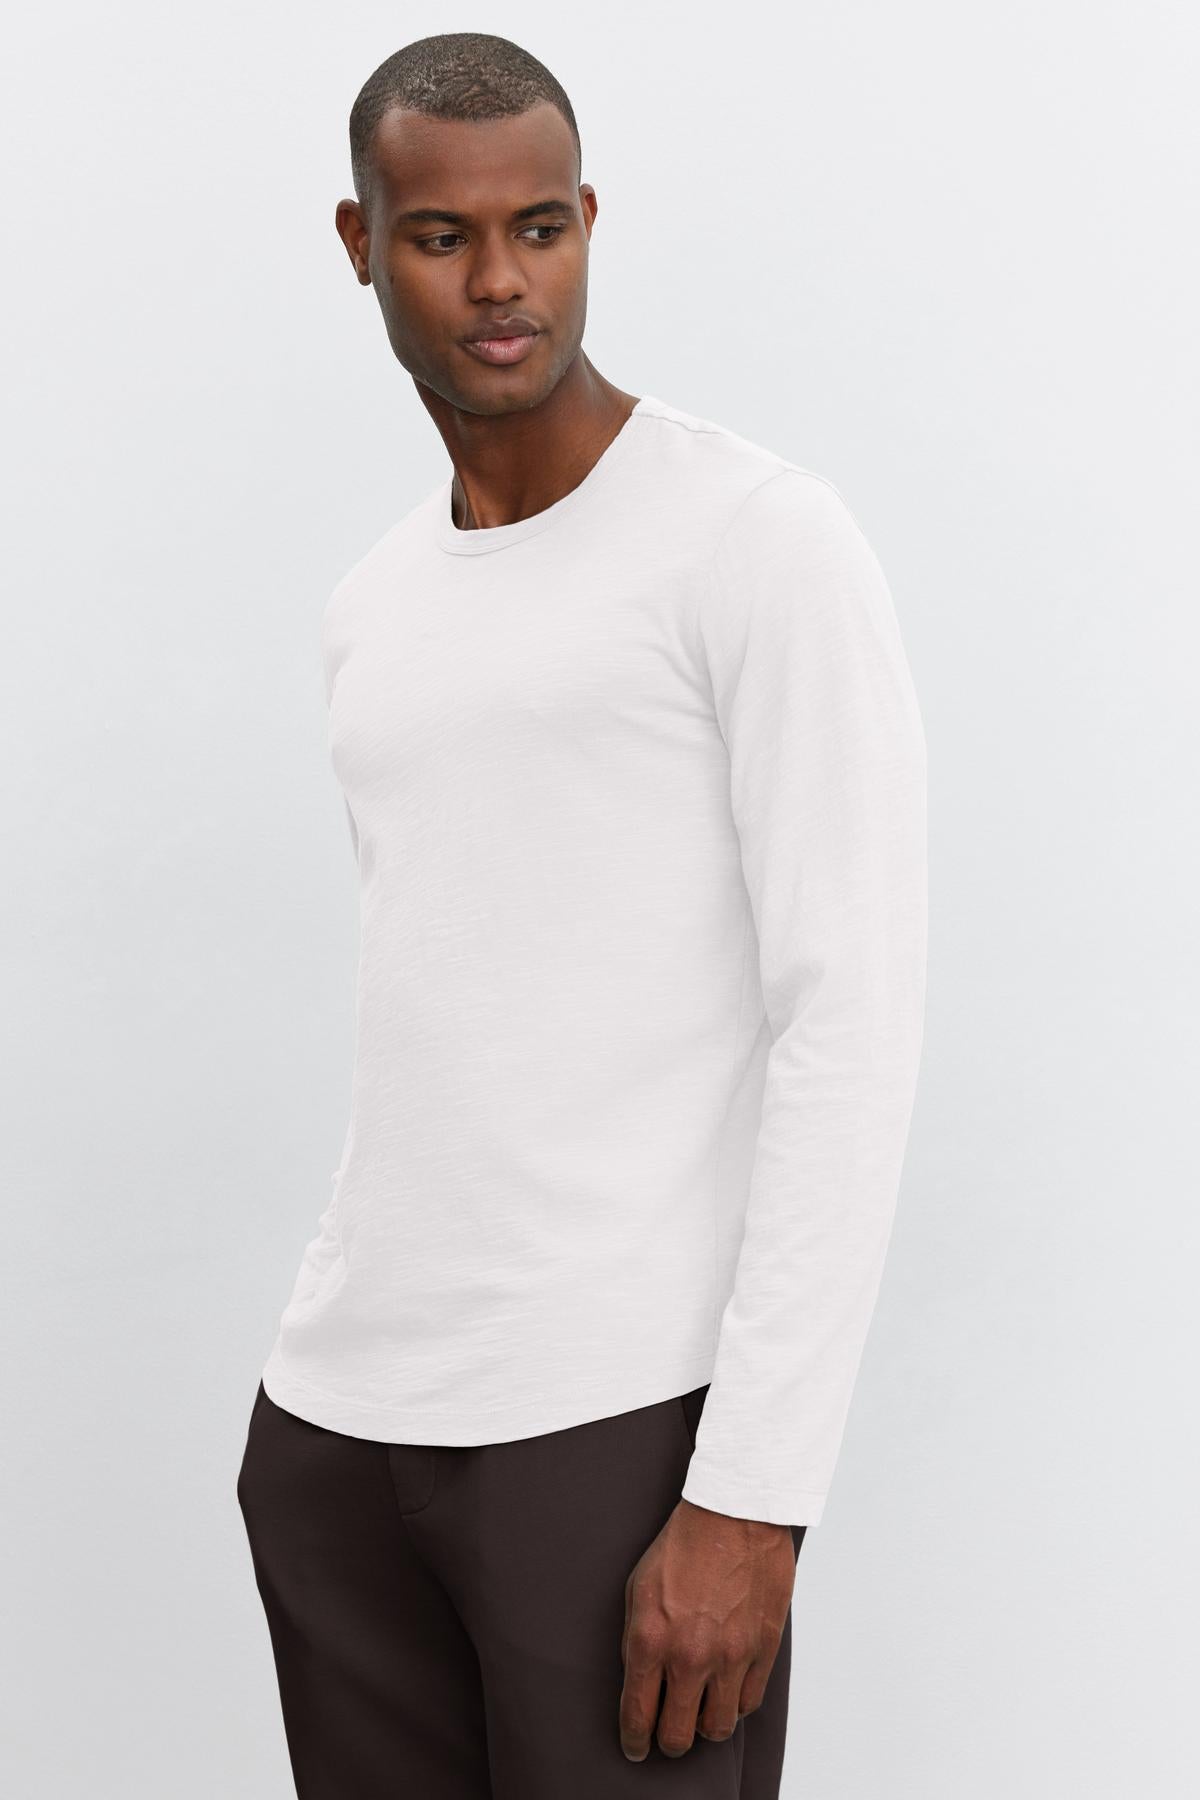 A man in a white long-sleeve slub knit shirt and dark pants standing against a light grey background, looking to his right, wearing the Velvet by Graham & Spencer KAI CREW NECK TEE.-36544896958657